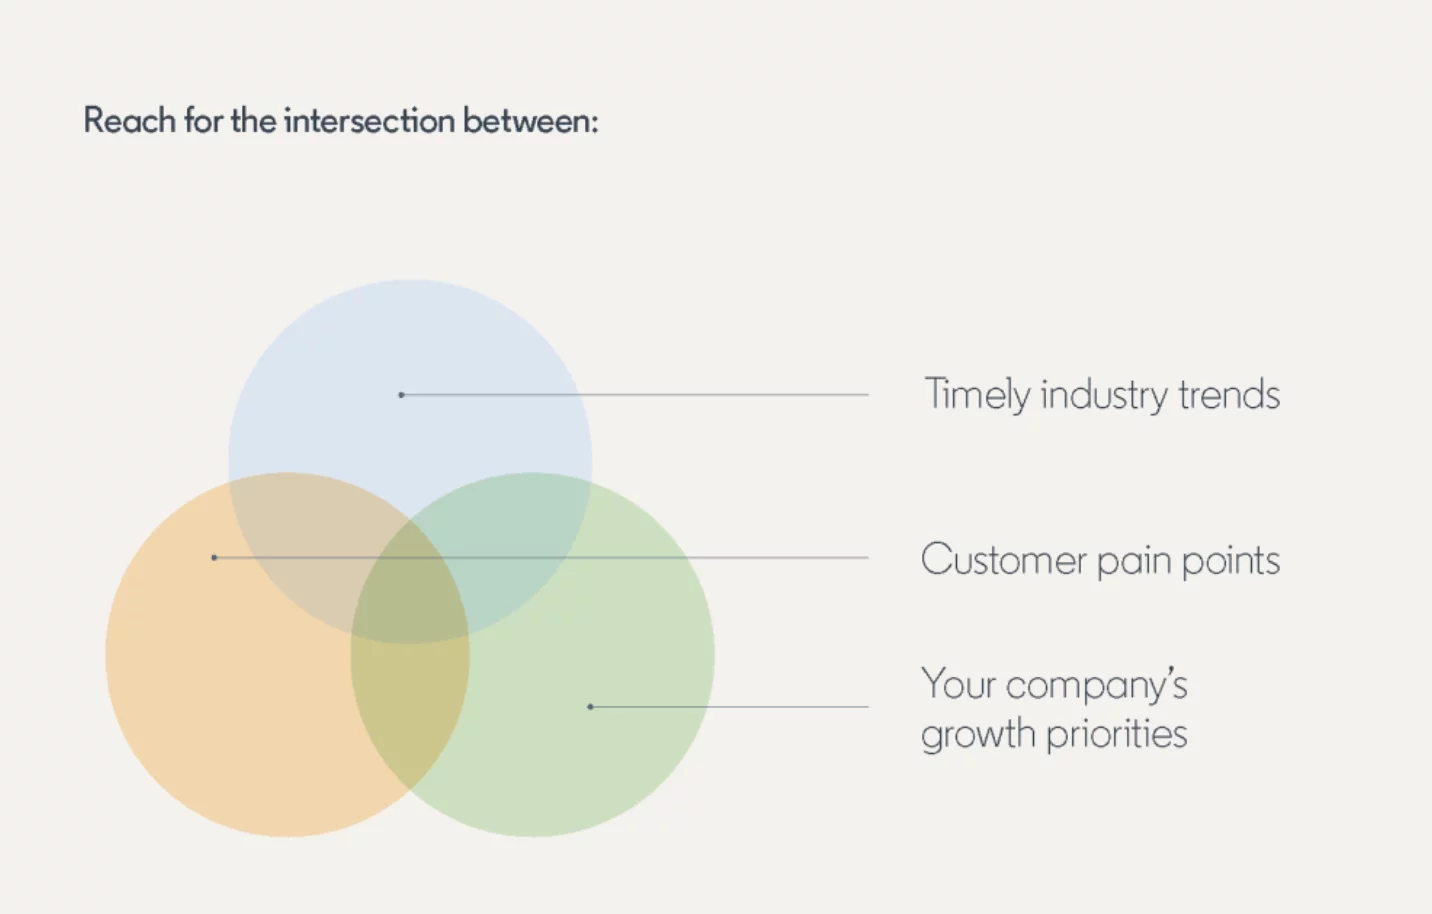 Venn diagram showing overlap between timely industry trends, customer pain points, and company growth priorities.